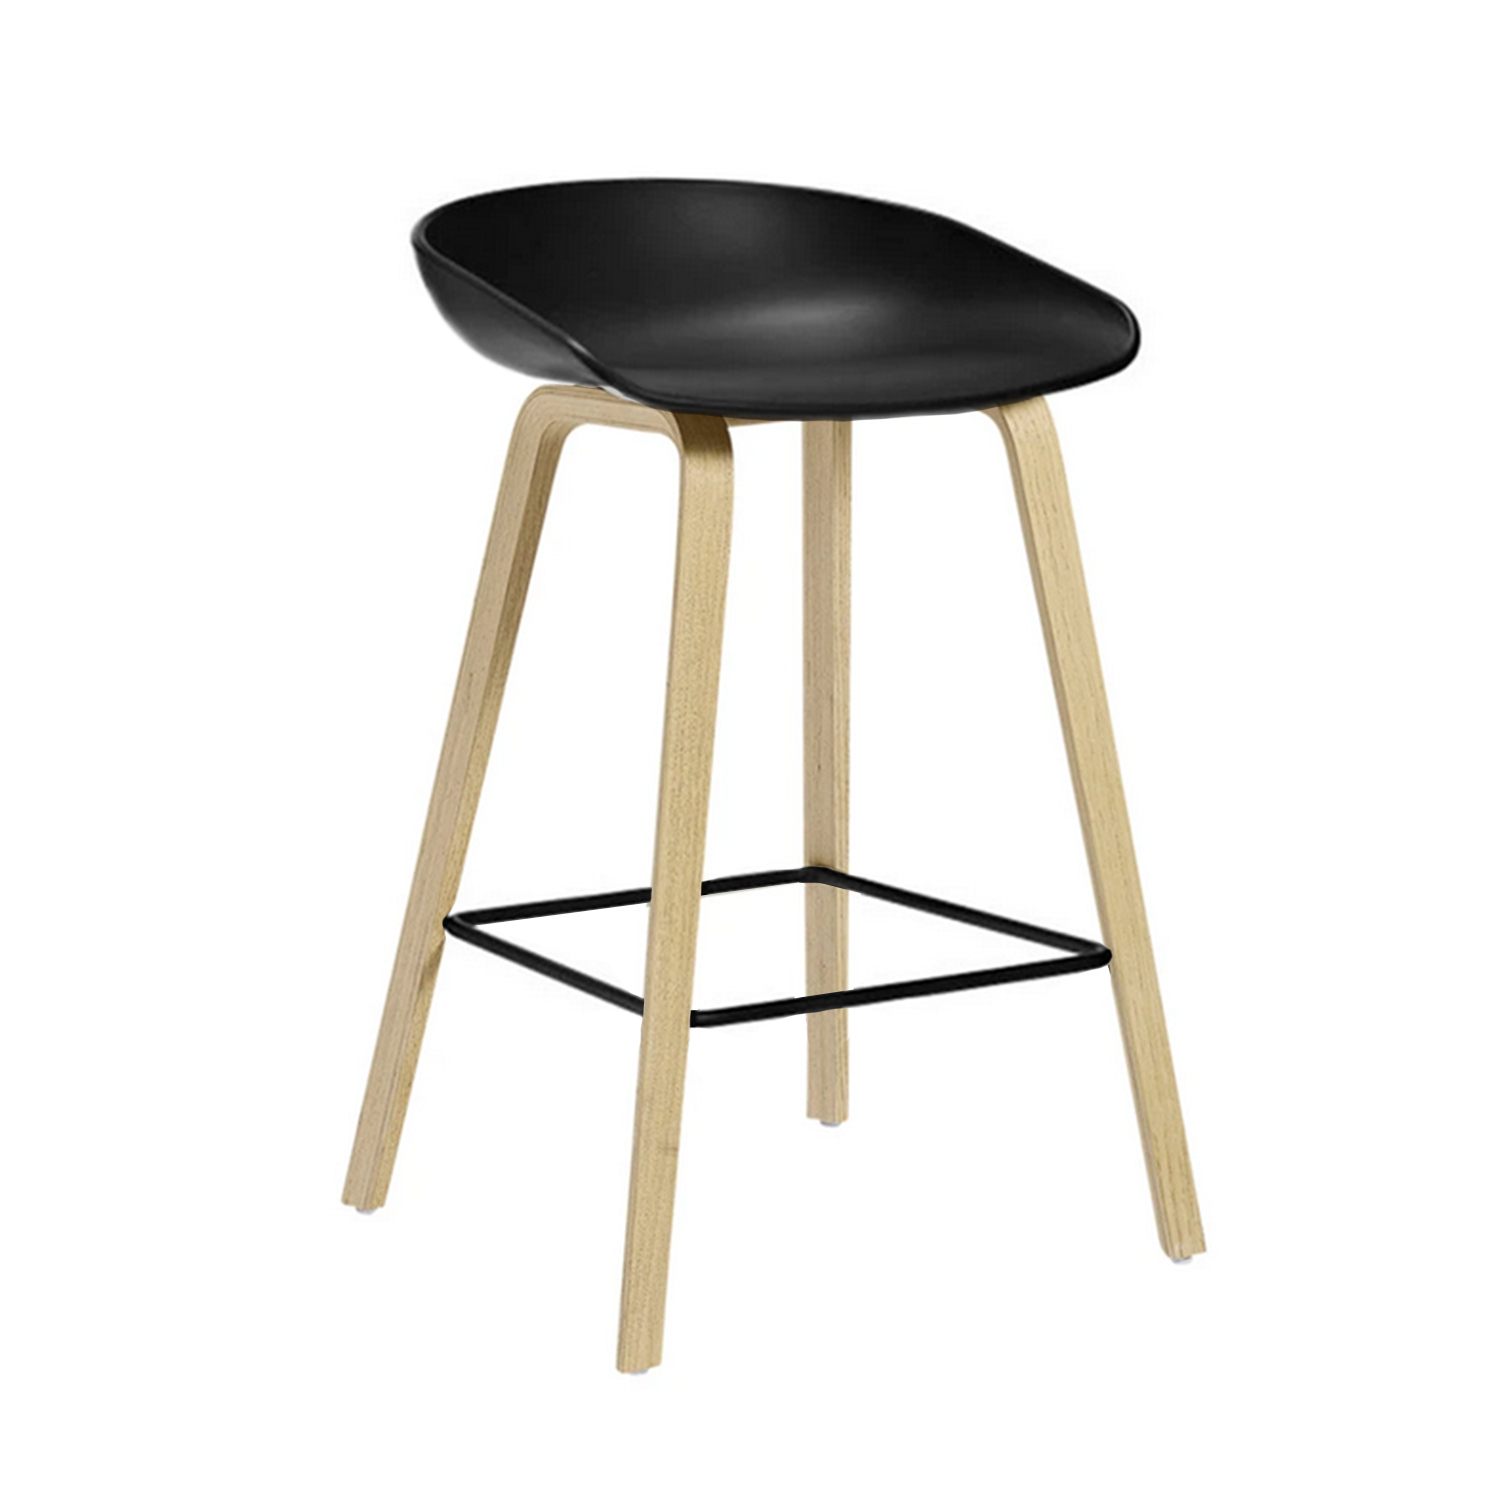 Furniture Source Philippines, Wooden Bar Stool Philippines